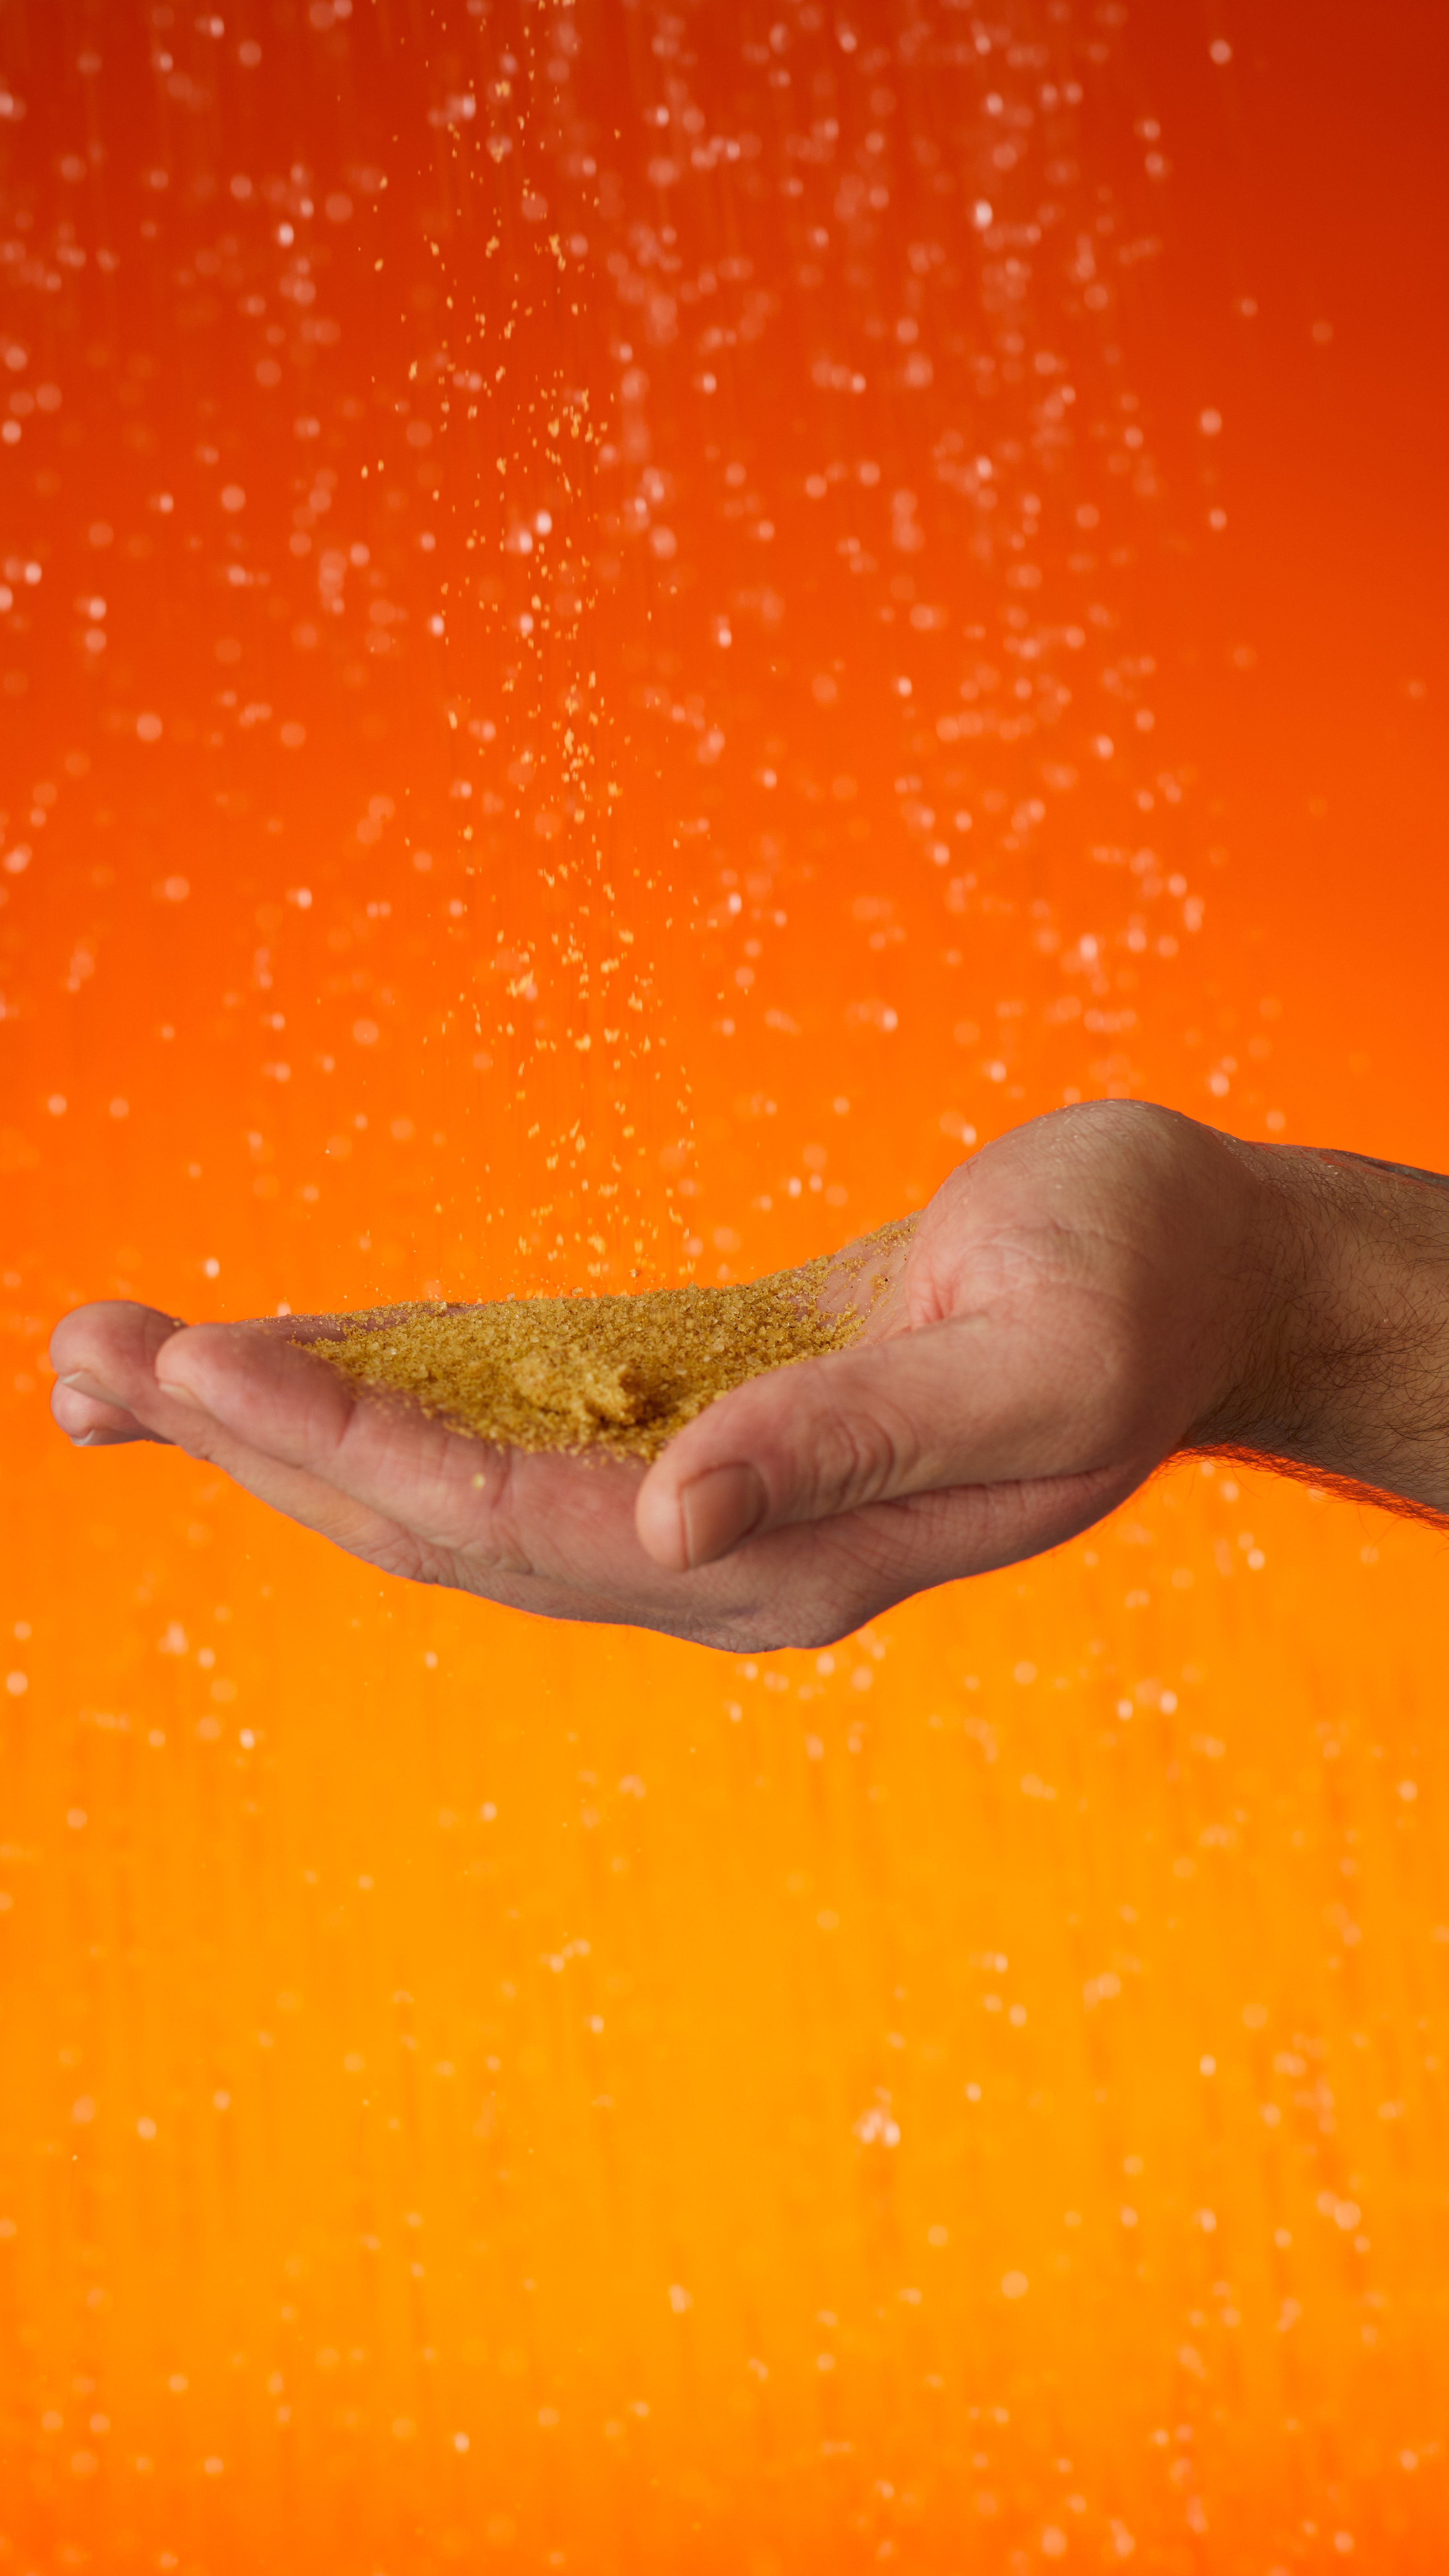 A hand holds the sandy showder as shower drops fall. On a dark to light orange gradient background.